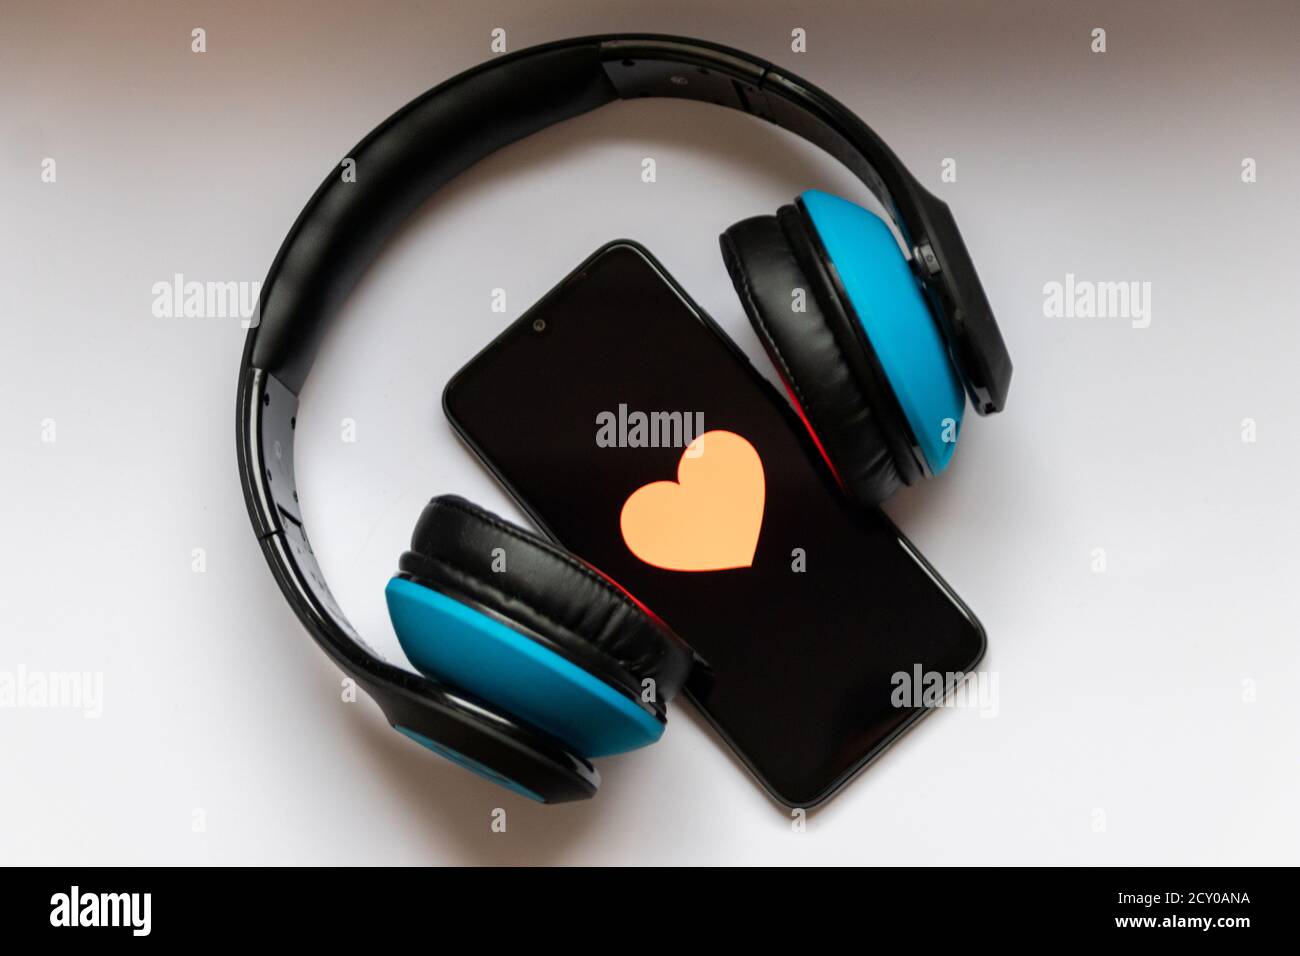 Black smartphone with red heart on the black screen and a cordless blue over ear headphone show mobile music streaming, health control and smartphone Stock Photo